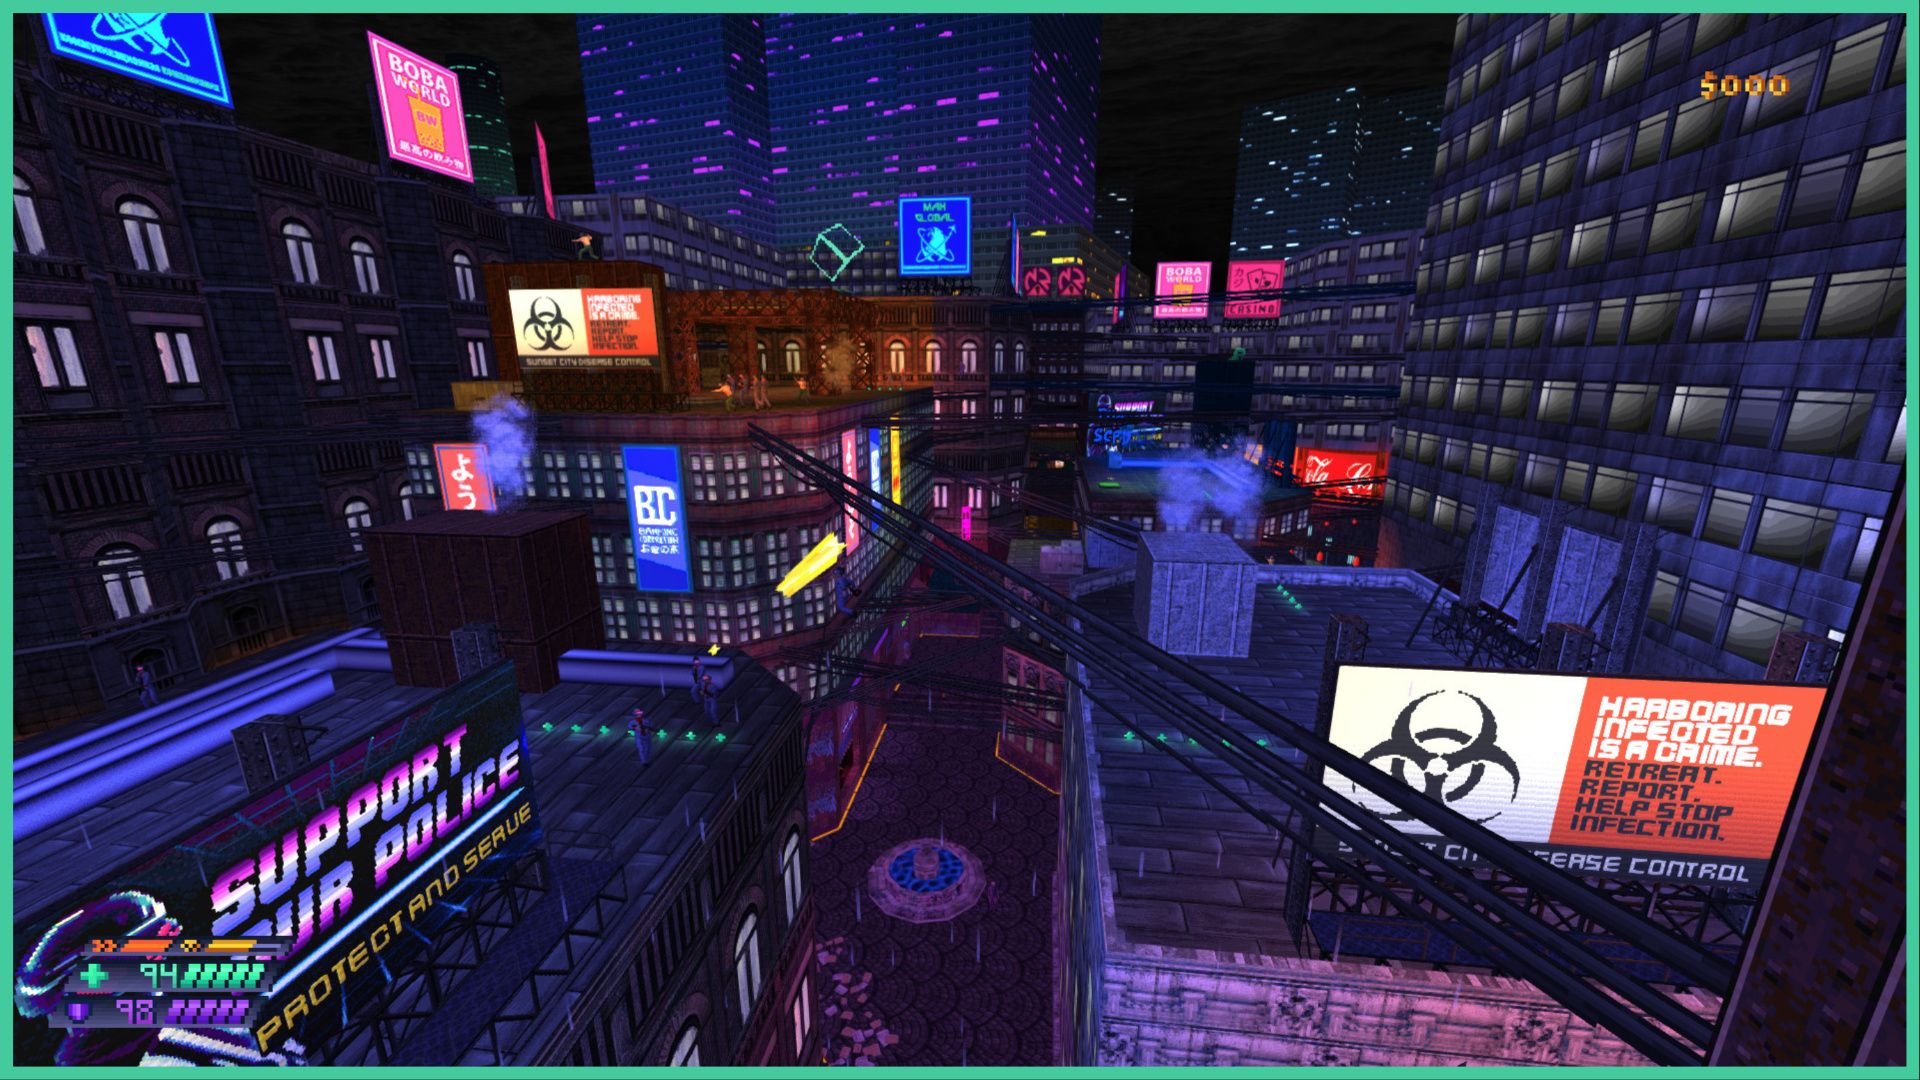 feature image for our beyond sunset news, the image is a screenshot of one of the locations in the game of sunset city at night time, as the neon signs and billboards shine in the darkness while the rain pours down